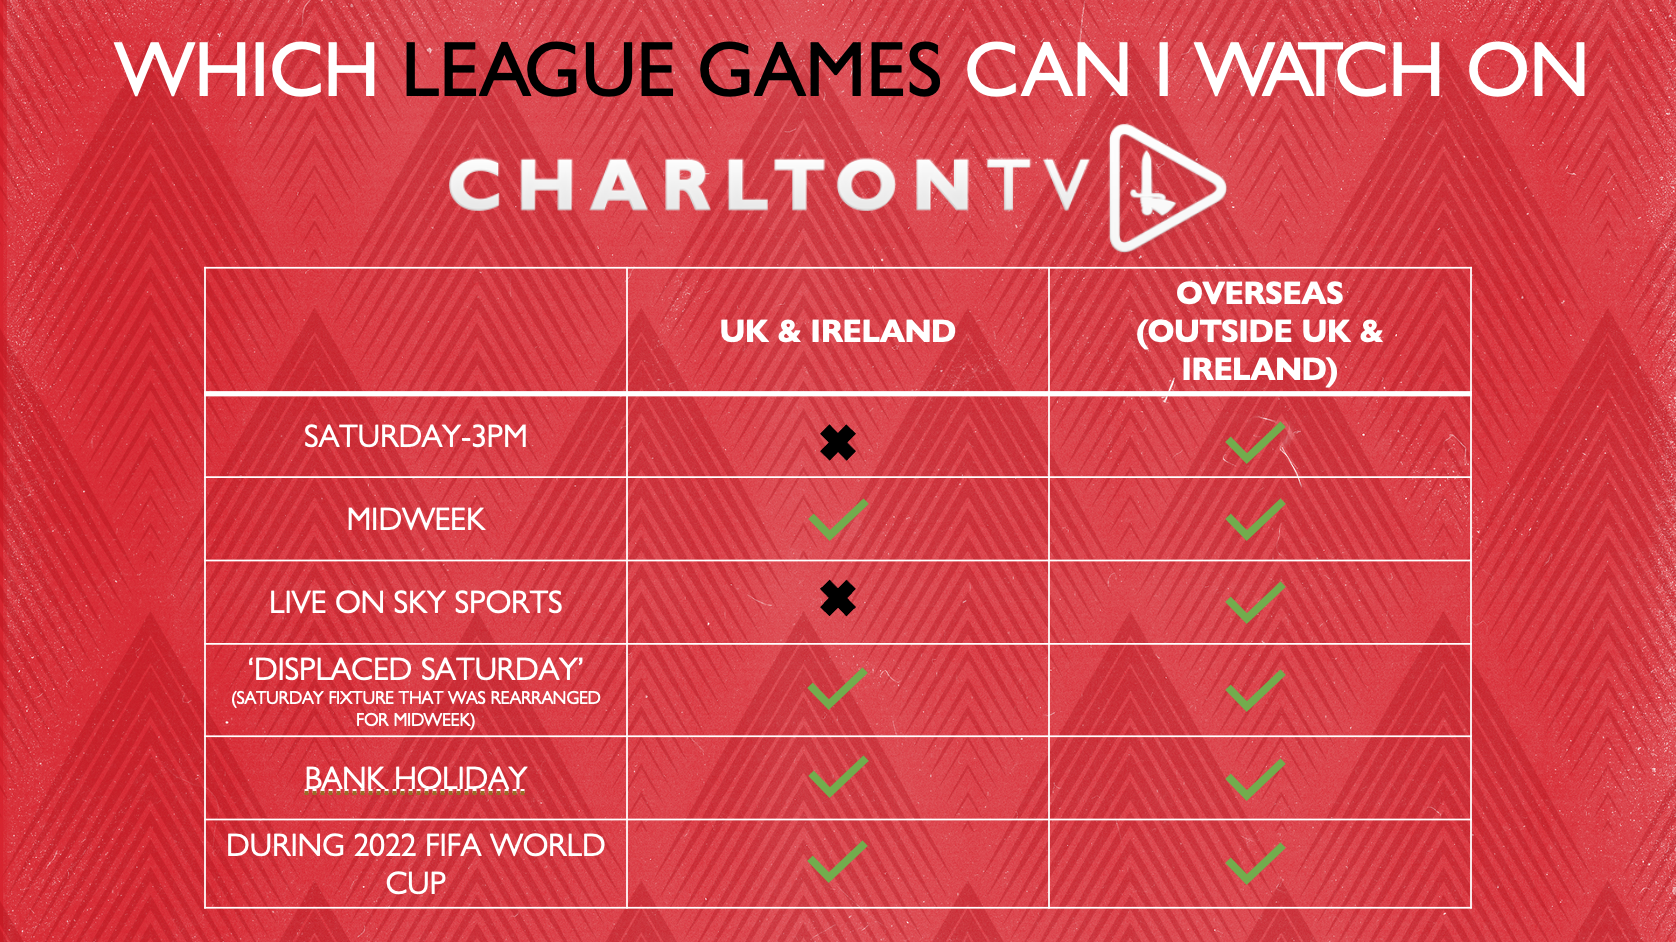 Which league games you can watch on CharltonTV in 2022/23